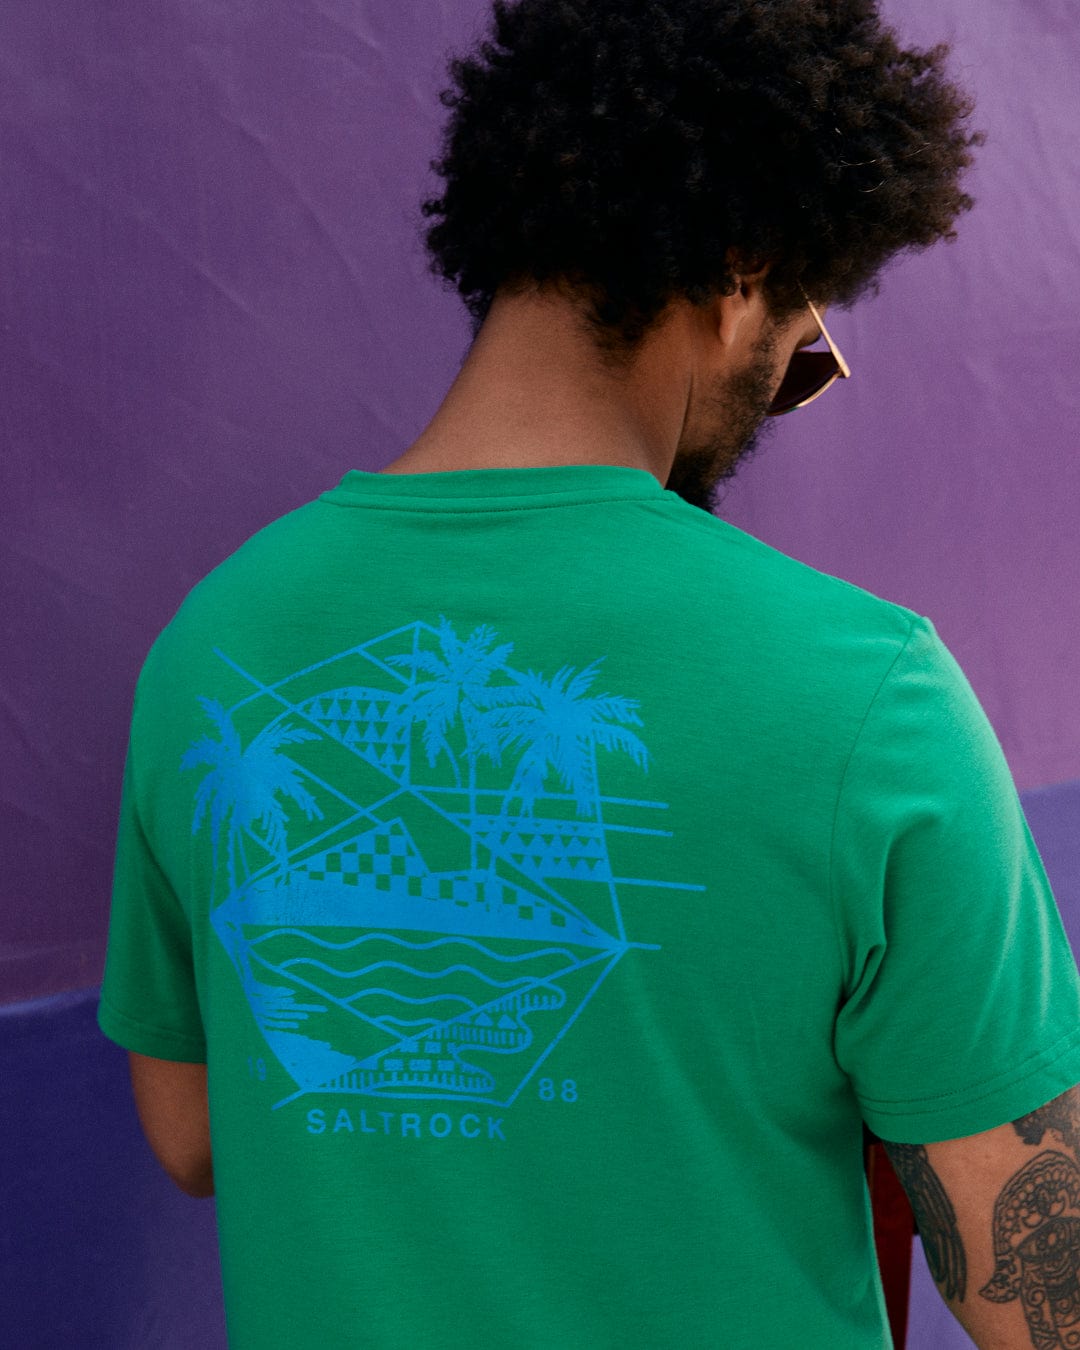 A person with curly hair, wearing sunglasses and a green Geo Palms Solid - Mens Recycled Hybrid T-Shirt - Green by Saltrock featuring Palm Beach graphics of palm trees and geometric shapes, stands in front of a purple wall, facing away from the camera.